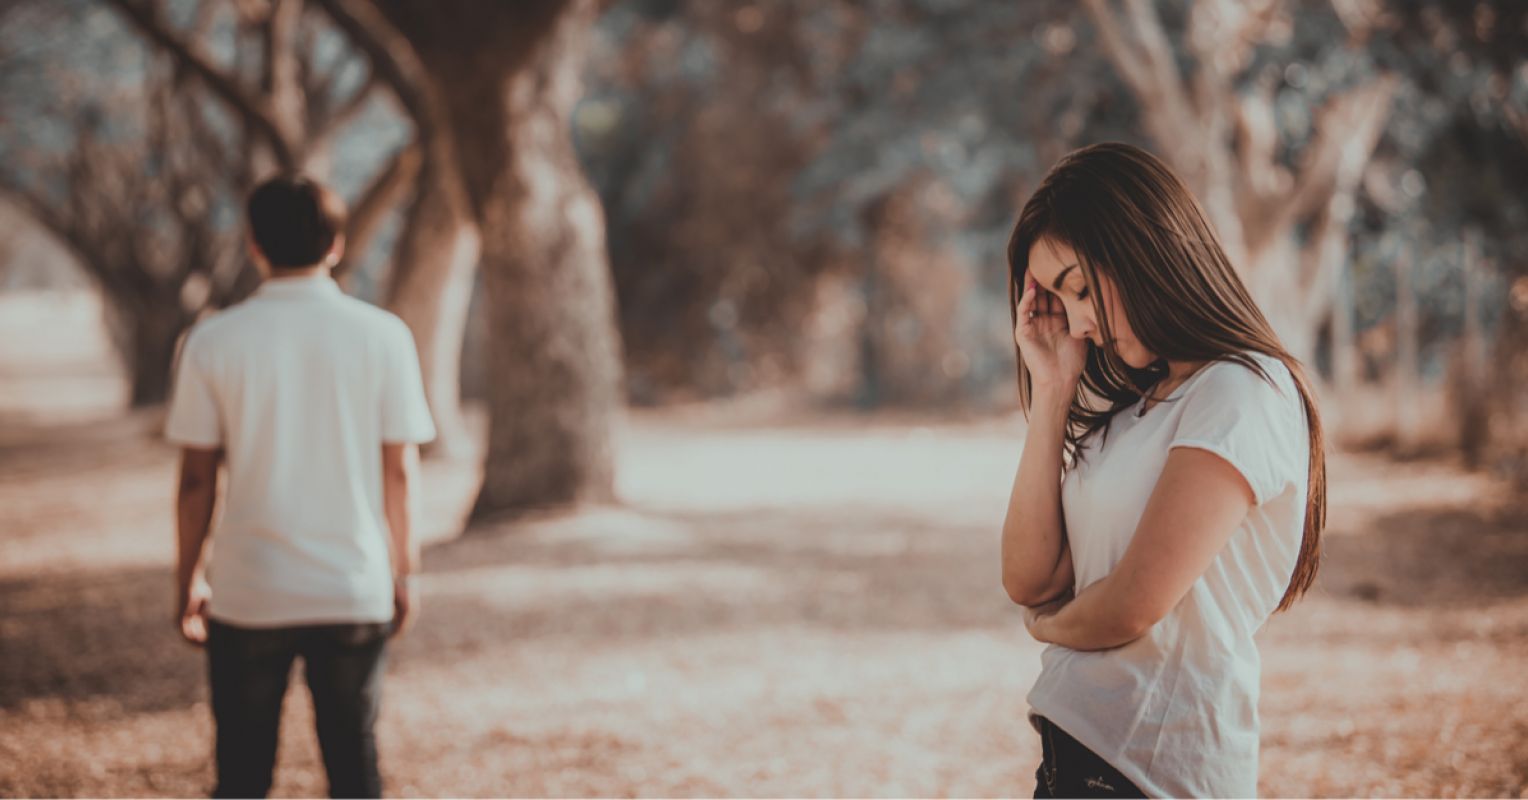 550+ Breakup Couple Pictures | Download Free Images on Unsplash